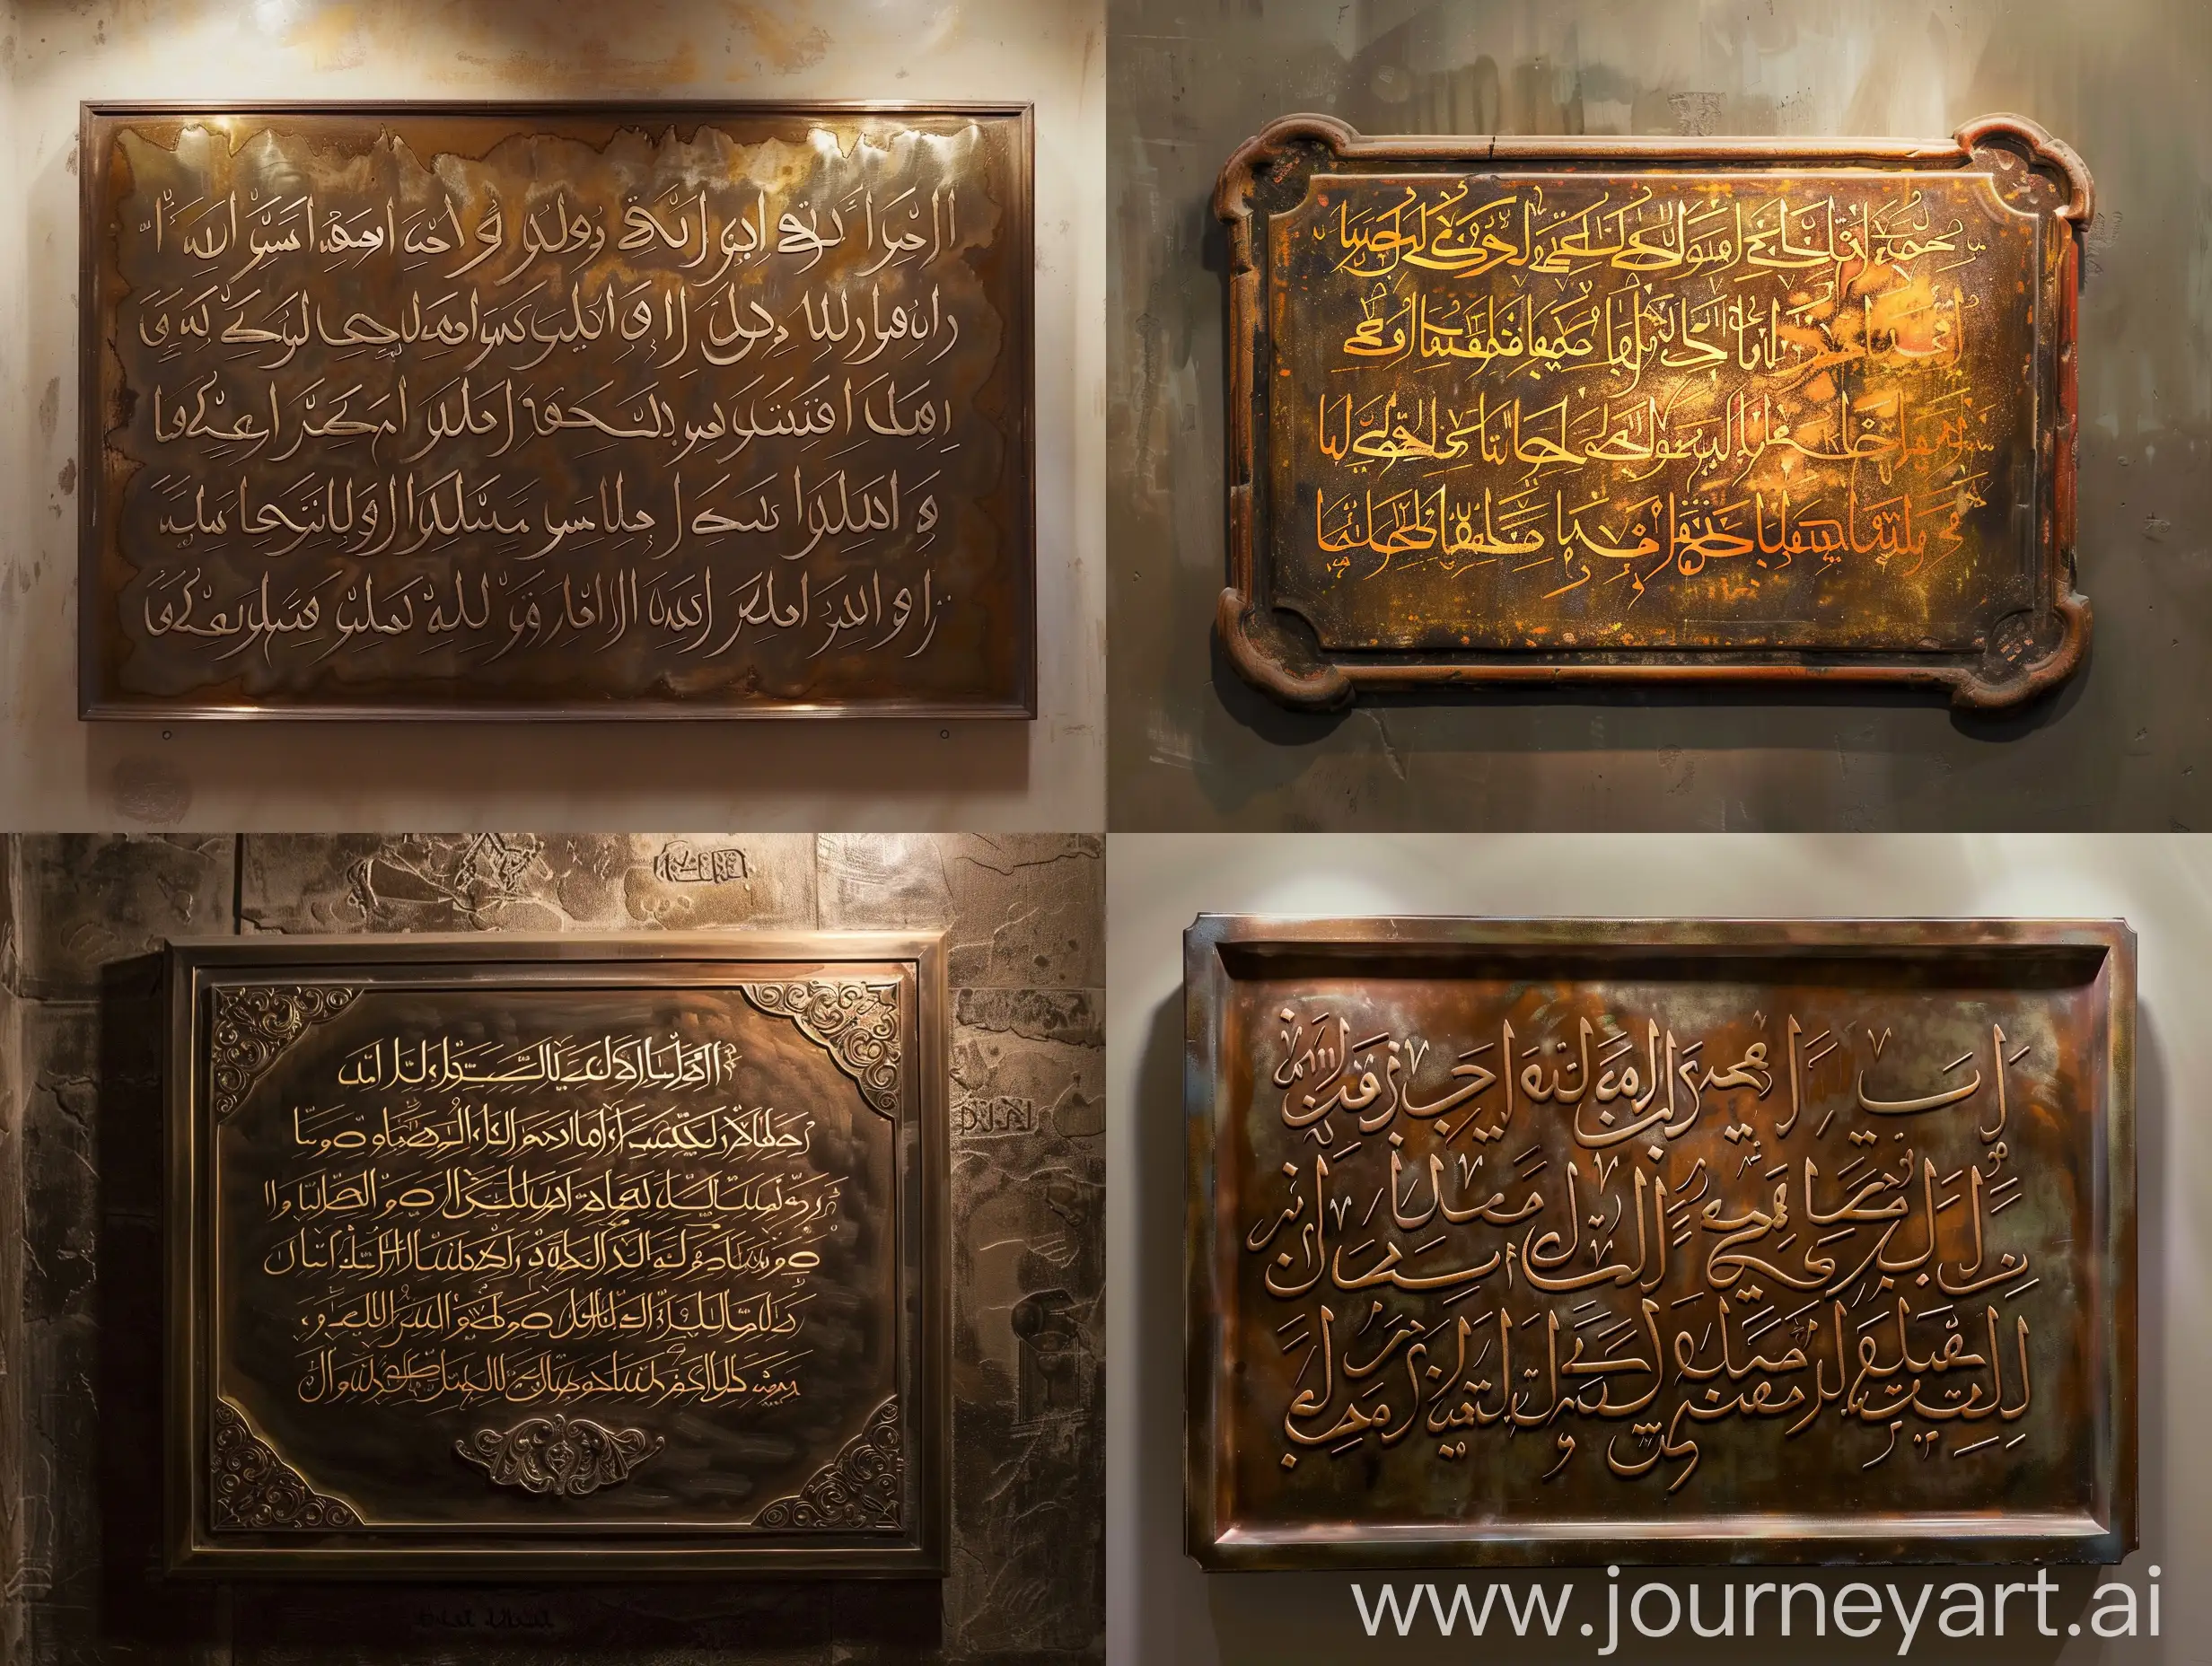 A plaque in the museum with the following written in Arabic calligraphy: (The strong believer is better and more beloved to Allah than the weak believer, and in each there is good. Be keen on what benefits you, and seek help from Allah and do not lose heart, and if something befalls you, do not say: If only I had done such and such, but say: Allah has decreed and what He wills He does; for (if) opens the door to the work of Satan.) Very clear handwriting, the shape of a painting and realistic handwriting with beautiful lighting